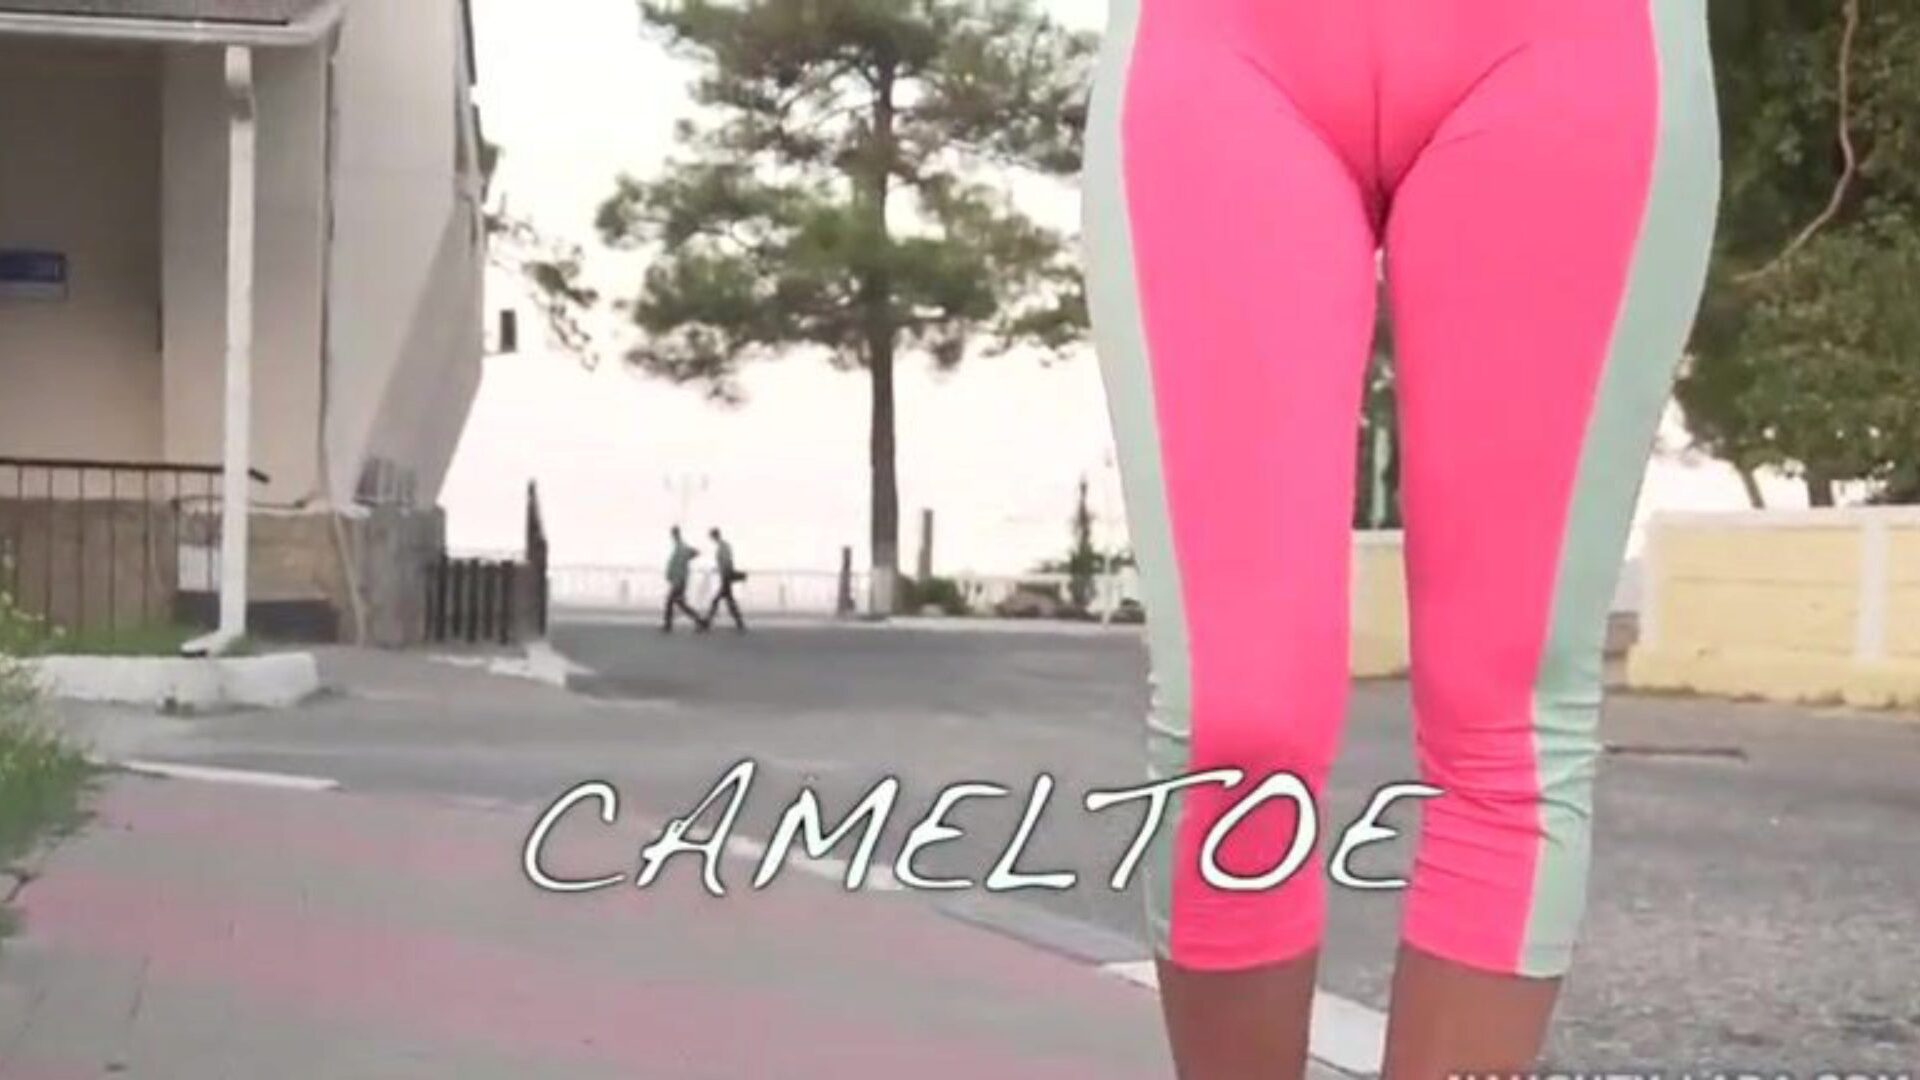 Cameltoe - I wore taut yoga pants in public